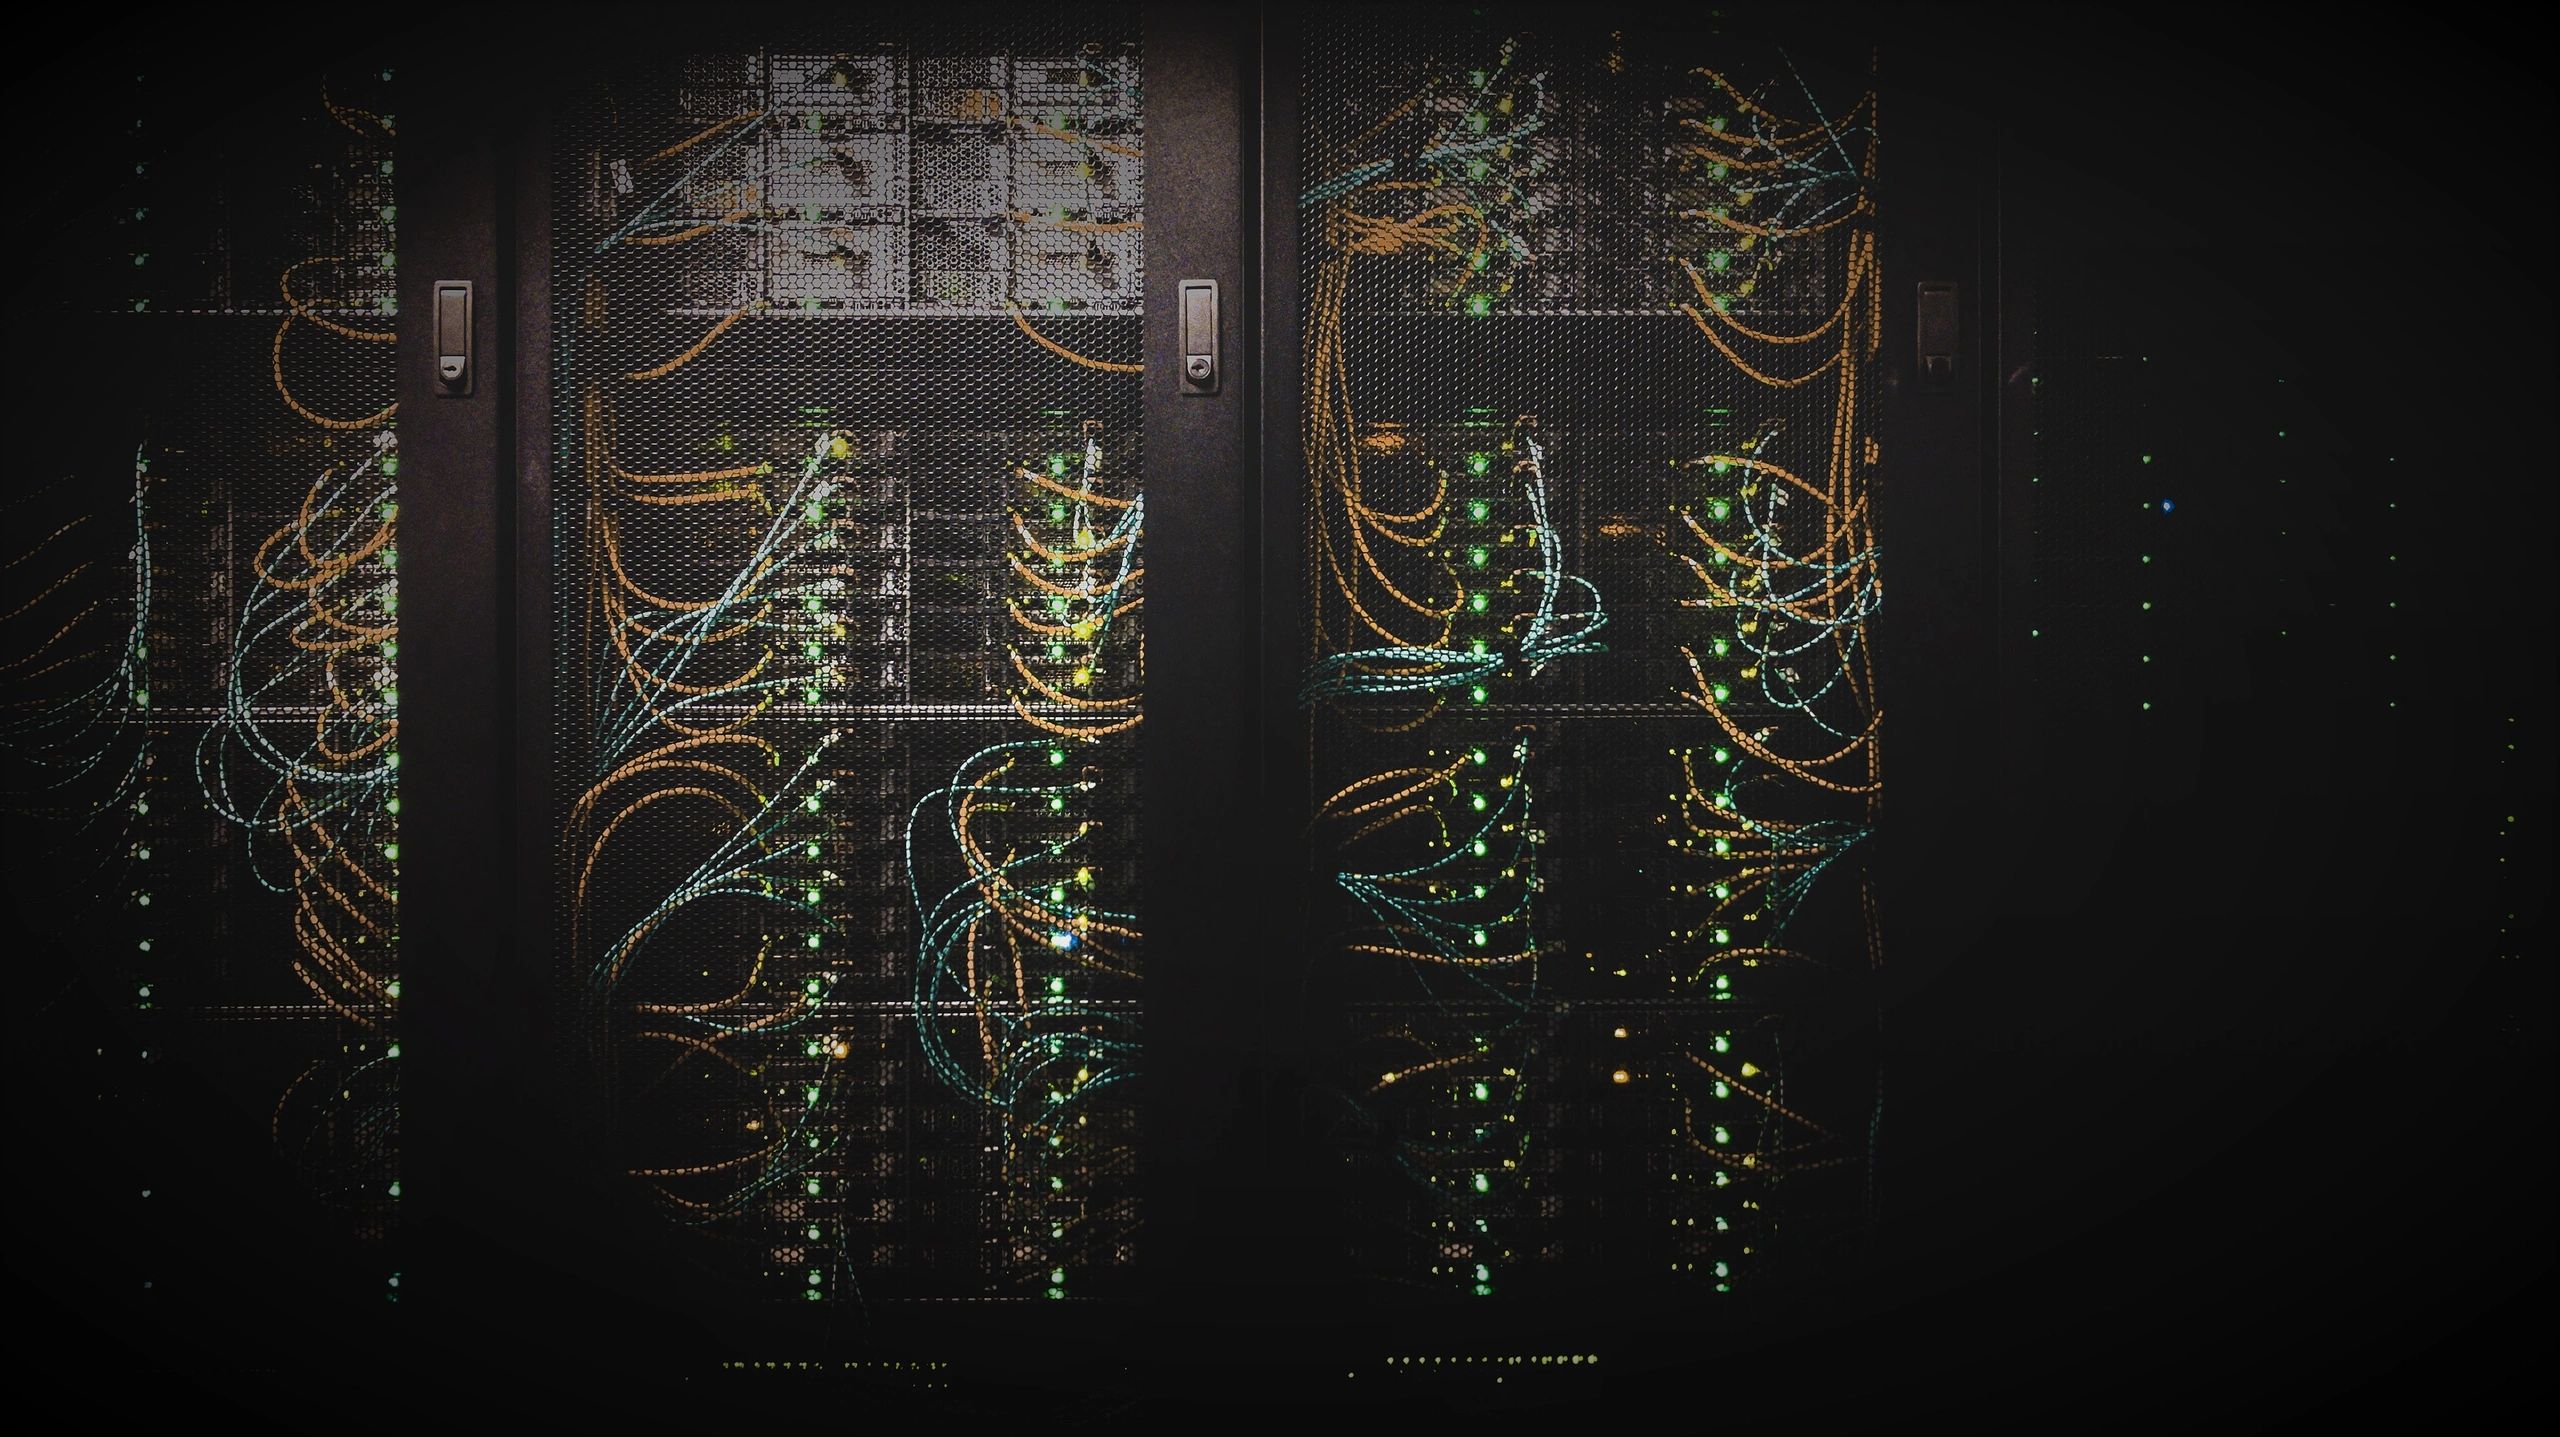 Servers, networks, and systems.